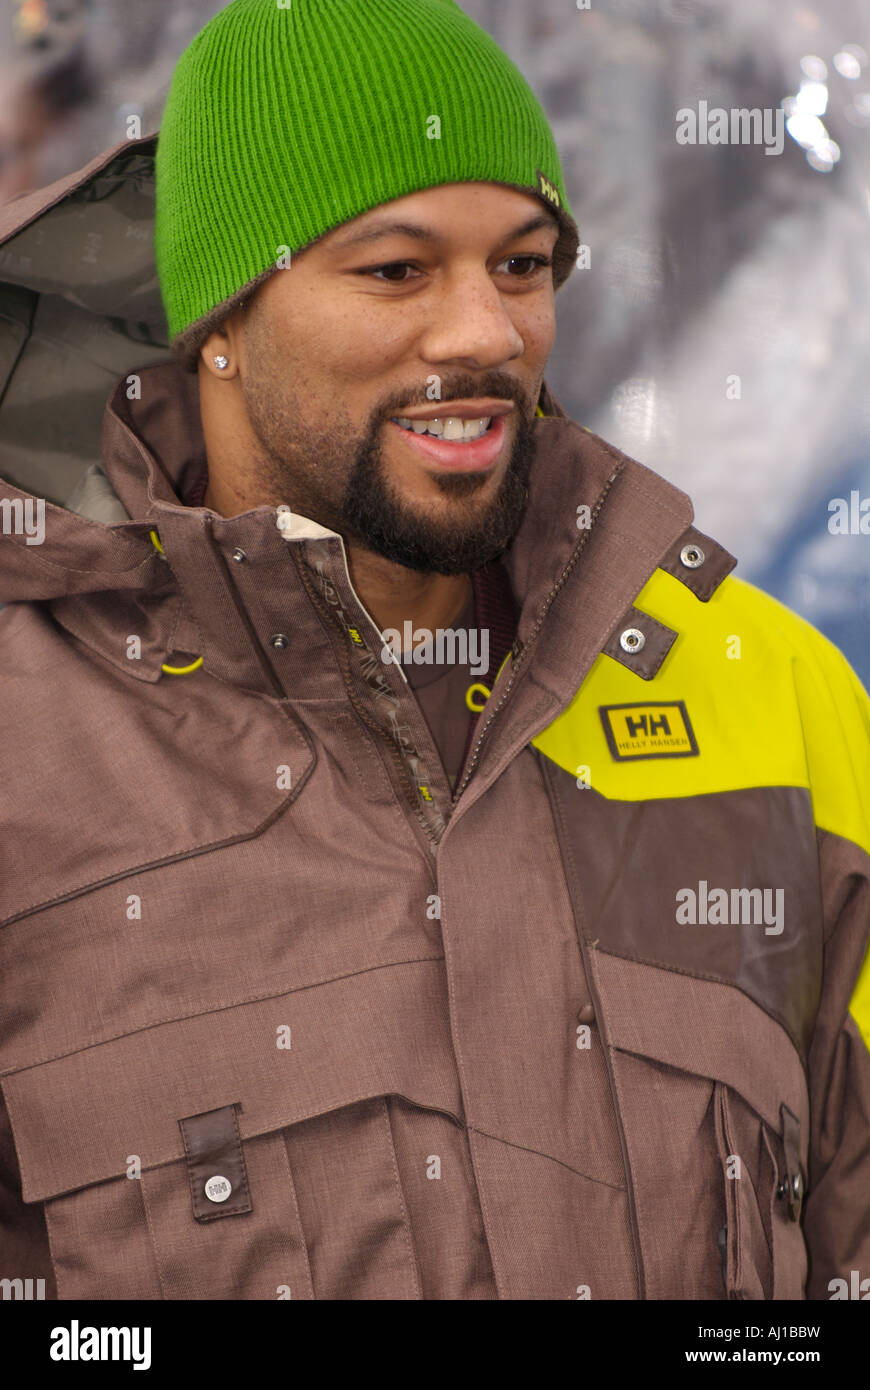 Grammy Award Winning Rapper Common at the 2007 ESPN Winter X Games 11  Snowboard Slopestyle Medal Ceremony Stock Photo - Alamy